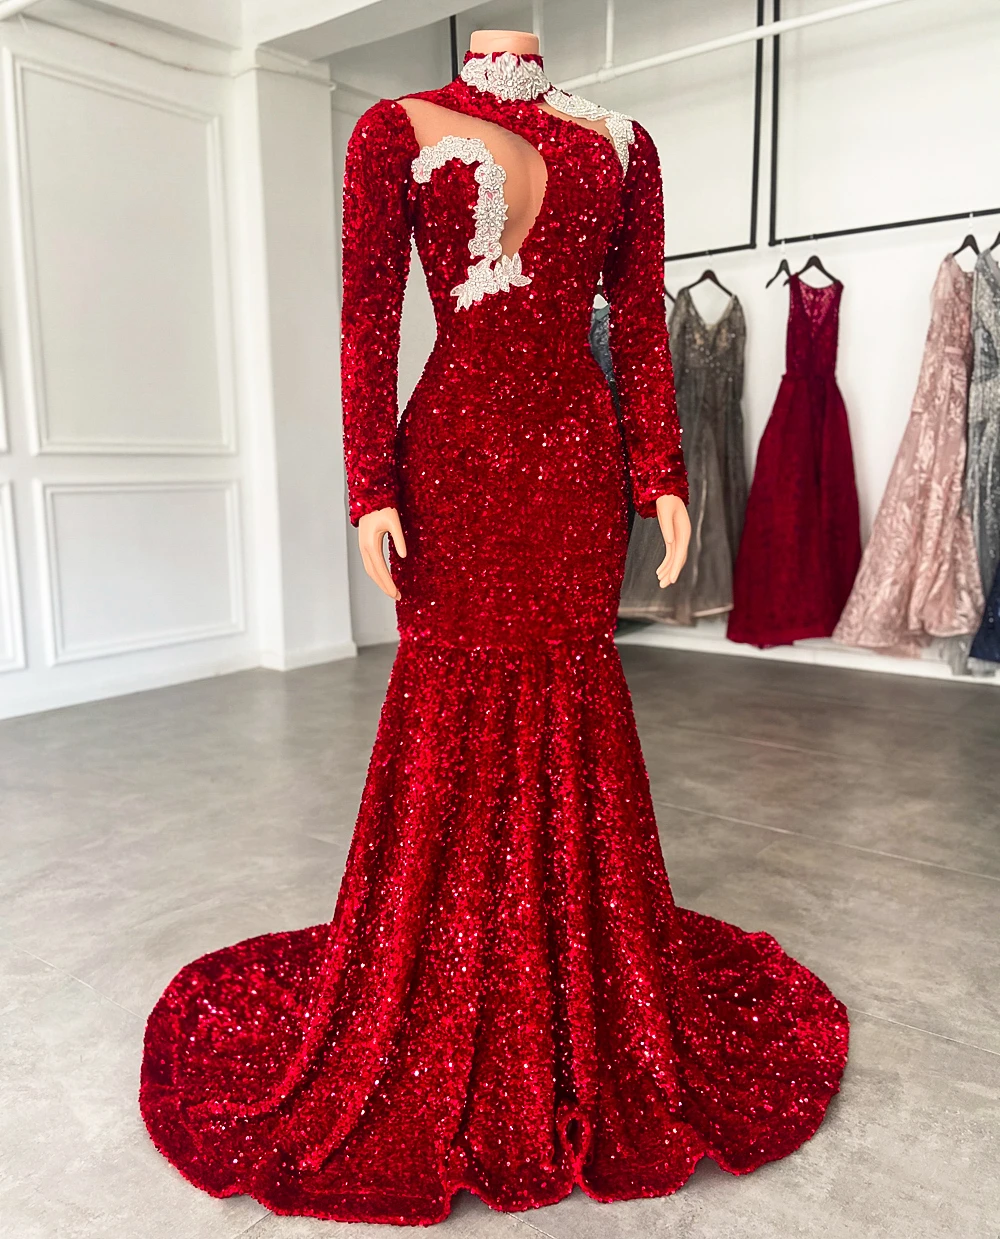 Red Wedding Bridal Dress Toast Dress Fishtail Elegant Beauty Dress | Red  wedding gowns, Red ball gowns, Prom dresses online